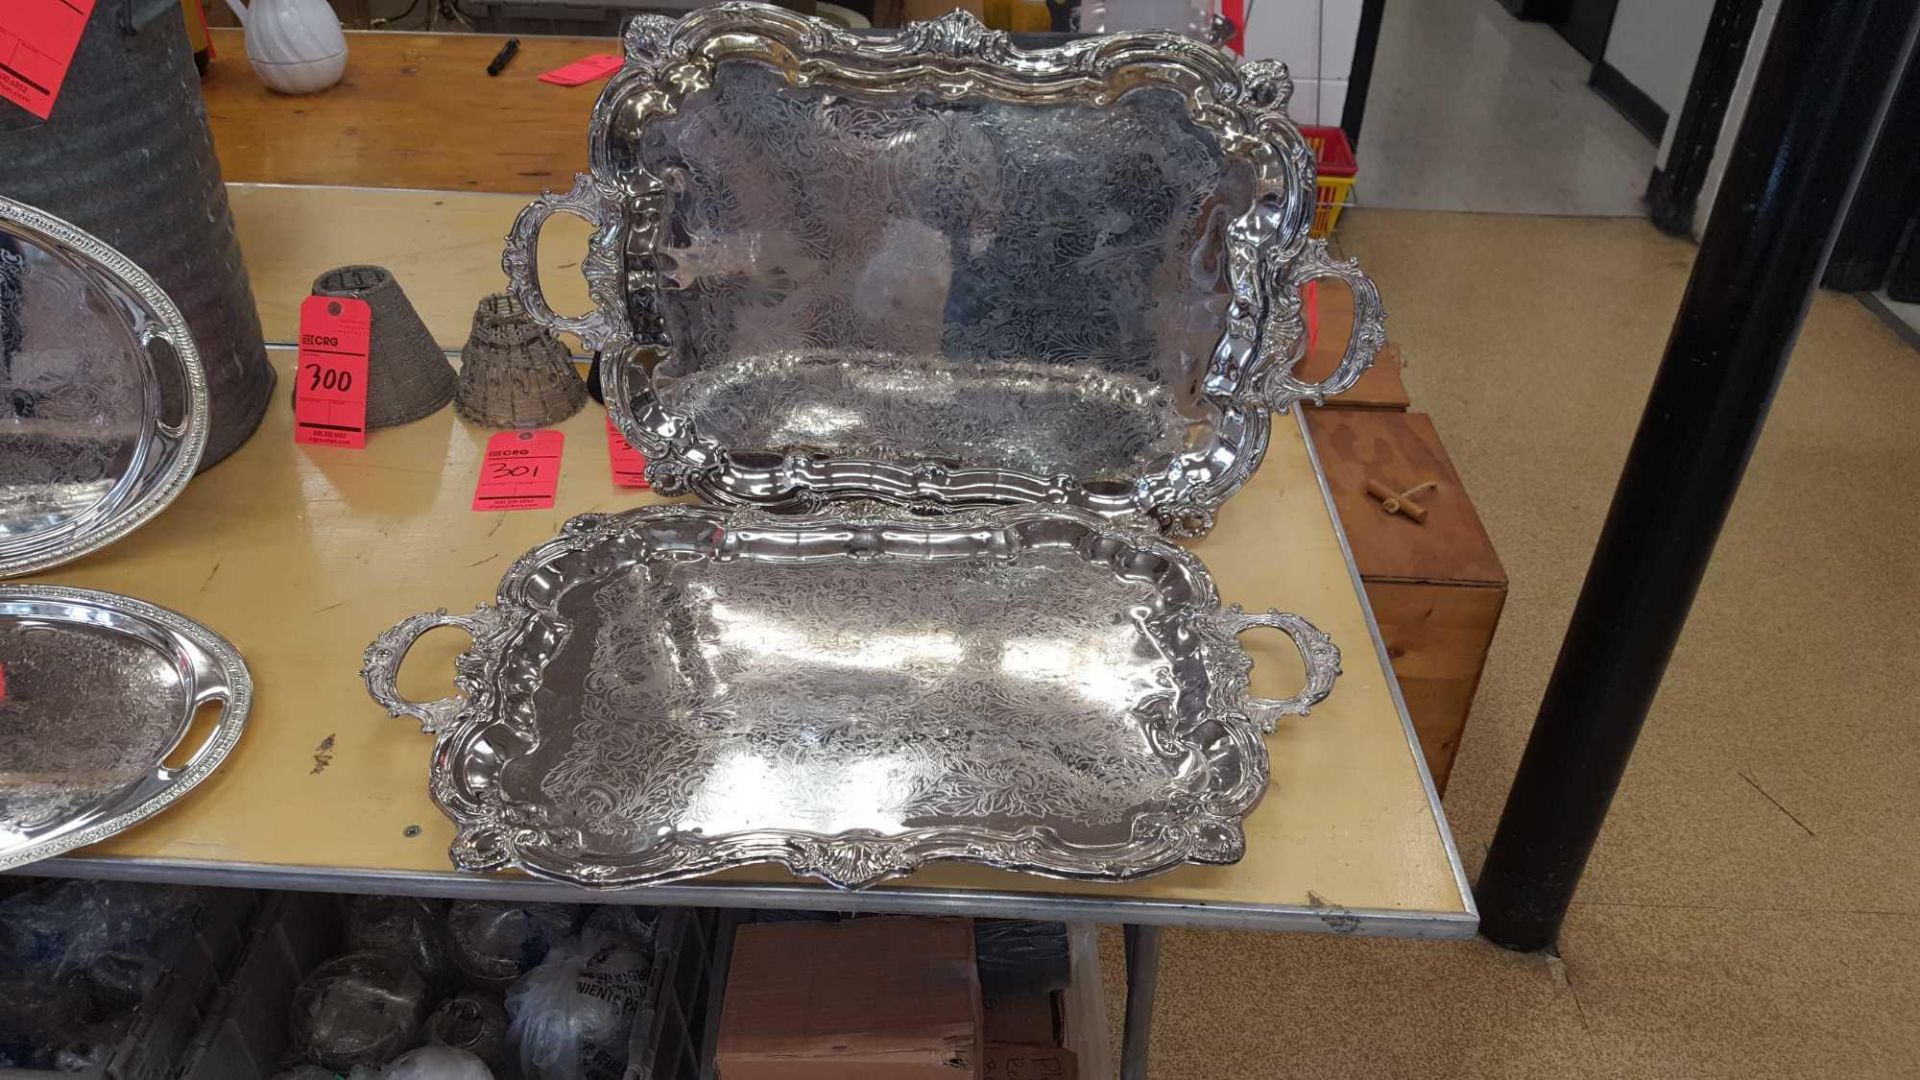 Lot of (16) asst silver trays including (5) 17 1/2" x 24" footed trays and (11) 14" x 19 1/2" trays - Image 3 of 4